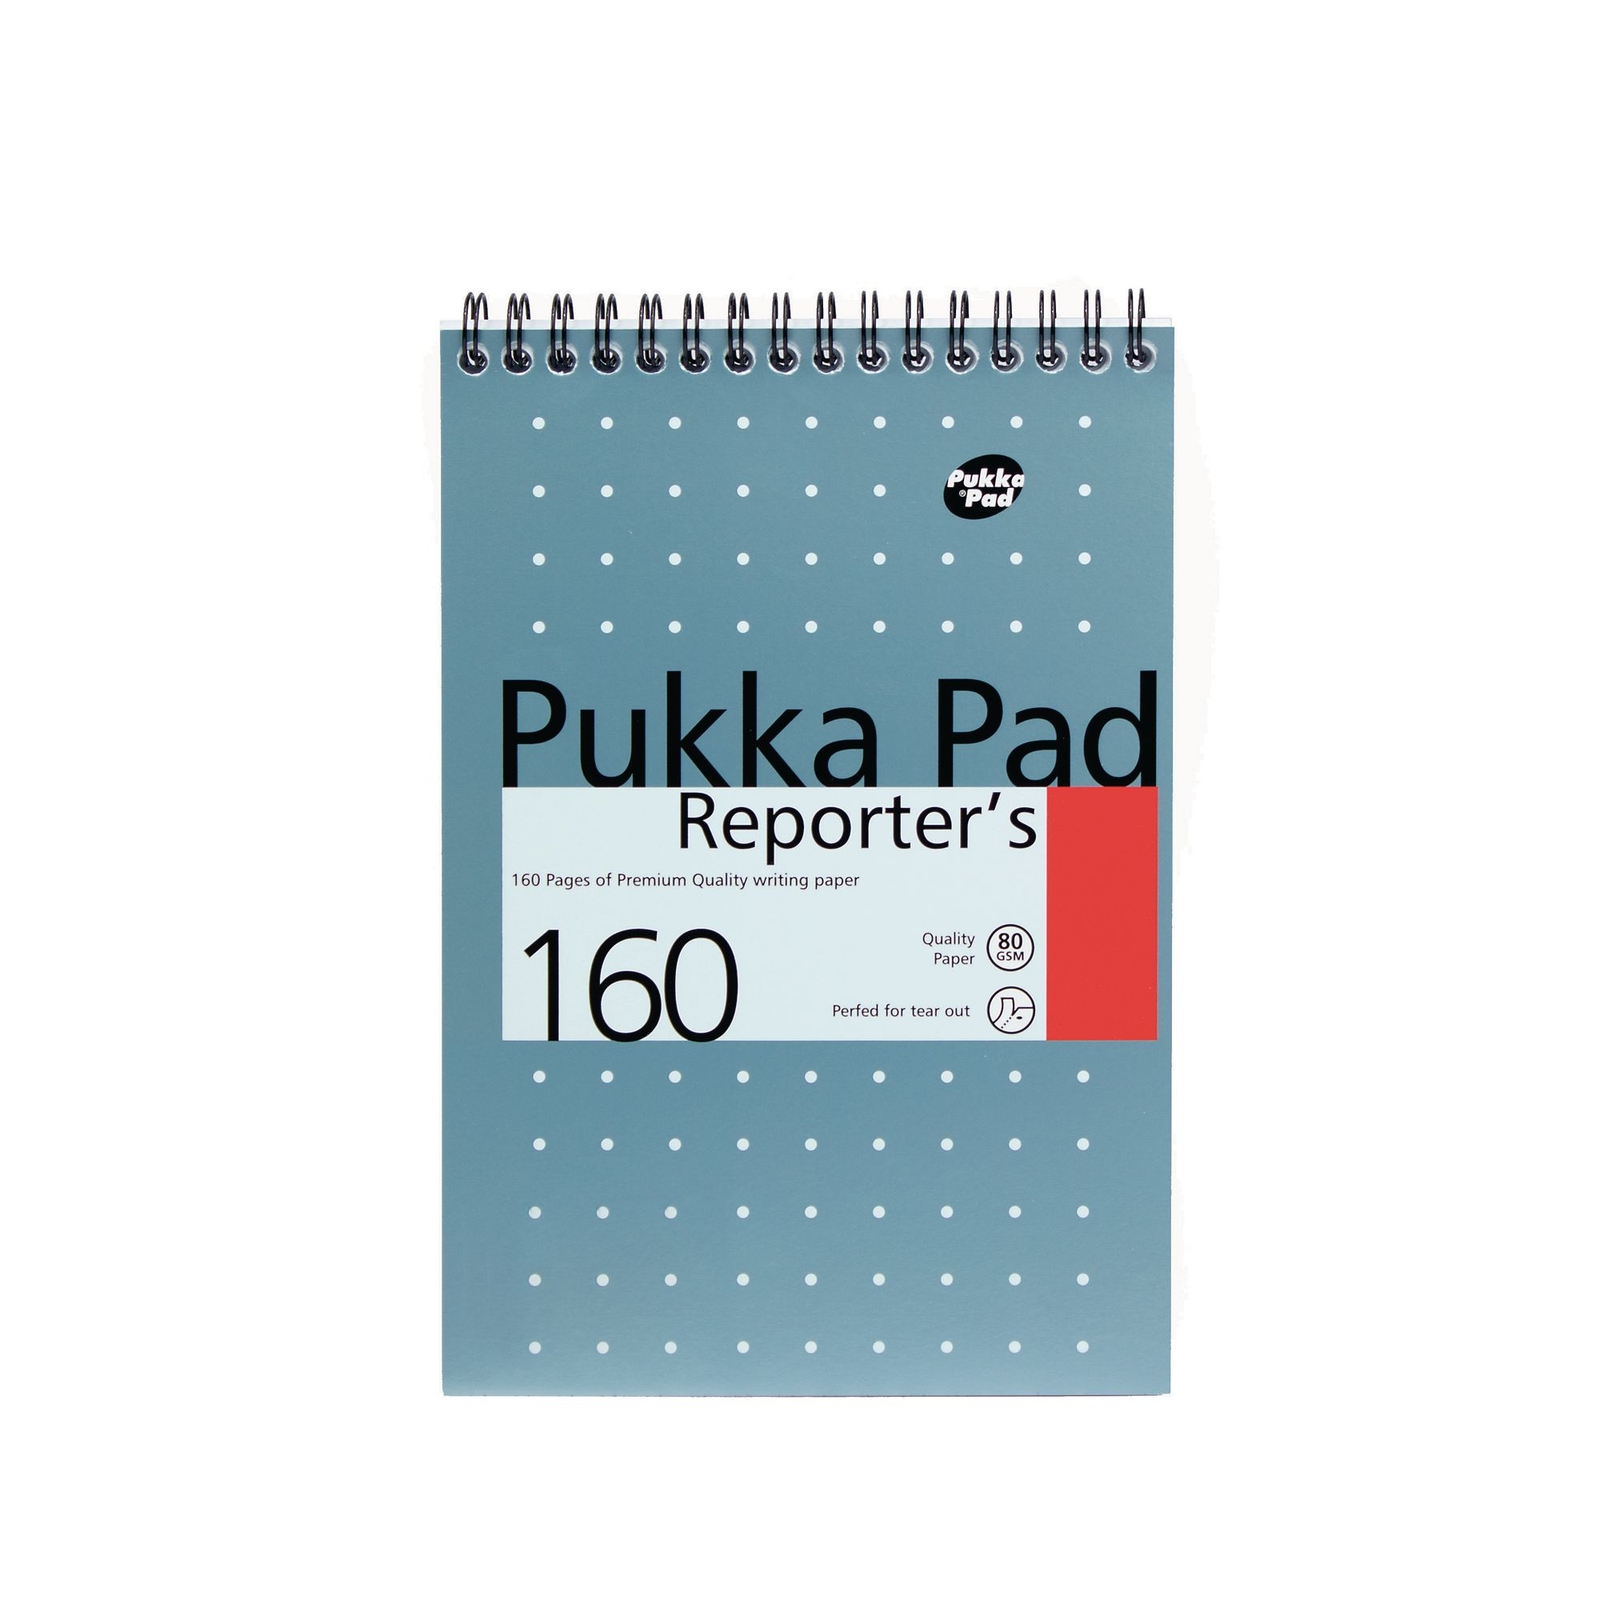 Pukka Pad Metallic Reporter’s Pad - 140 x 205mm - 160 pages - 8mm lined